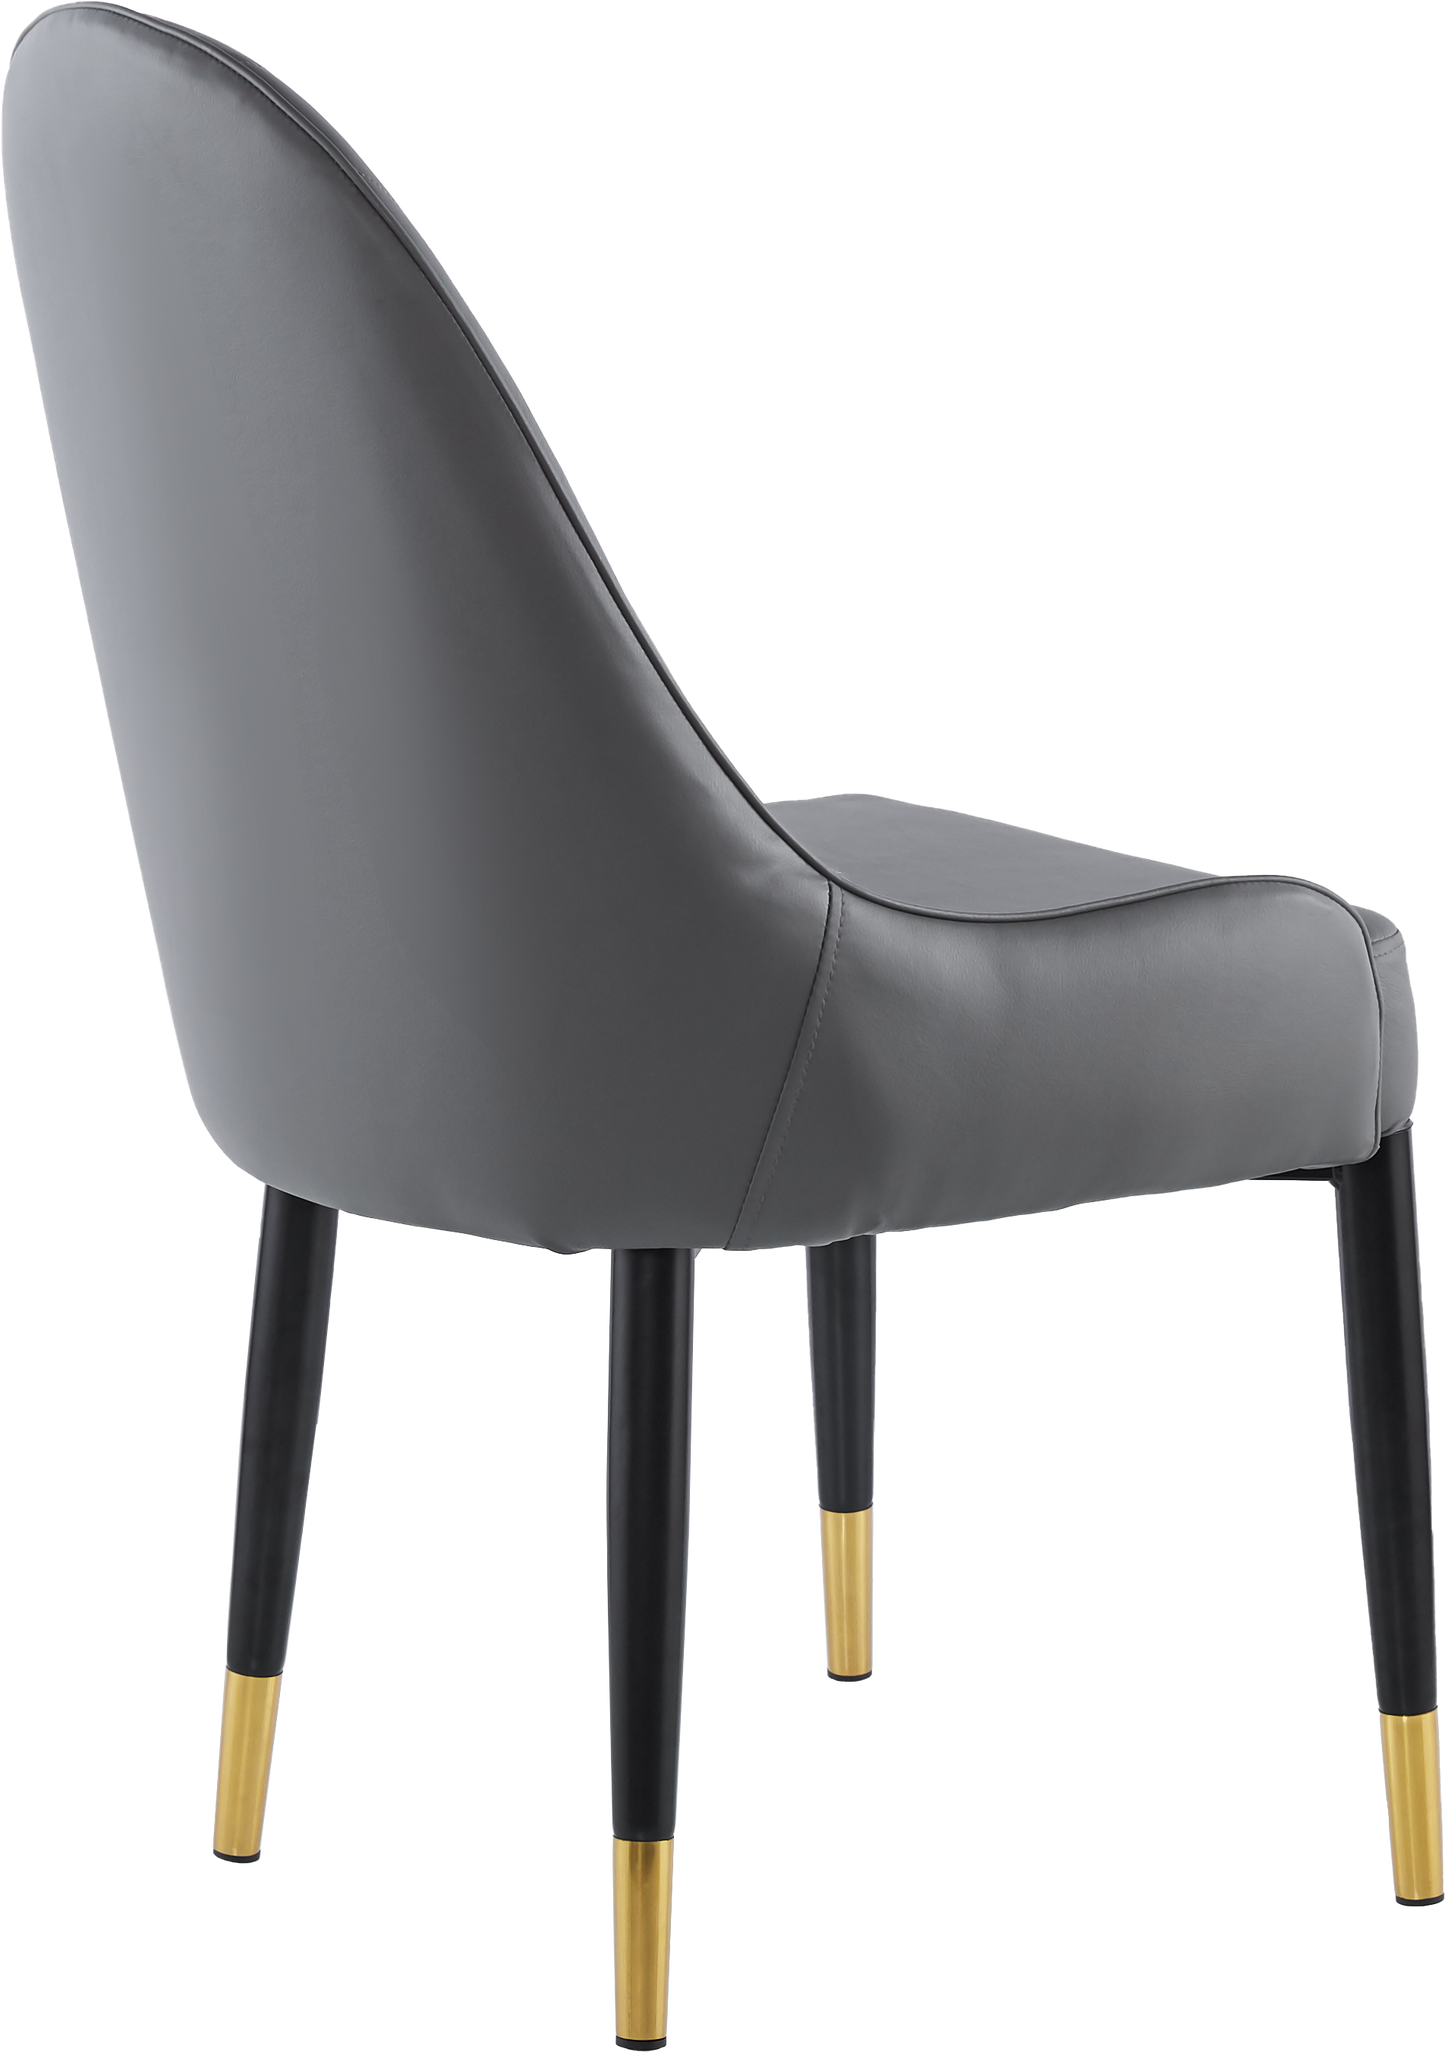 Modern Leather Dining Chair Set of 2, Upholstered Accent Dining Chair, Legs with Black Plastic Tube Plug